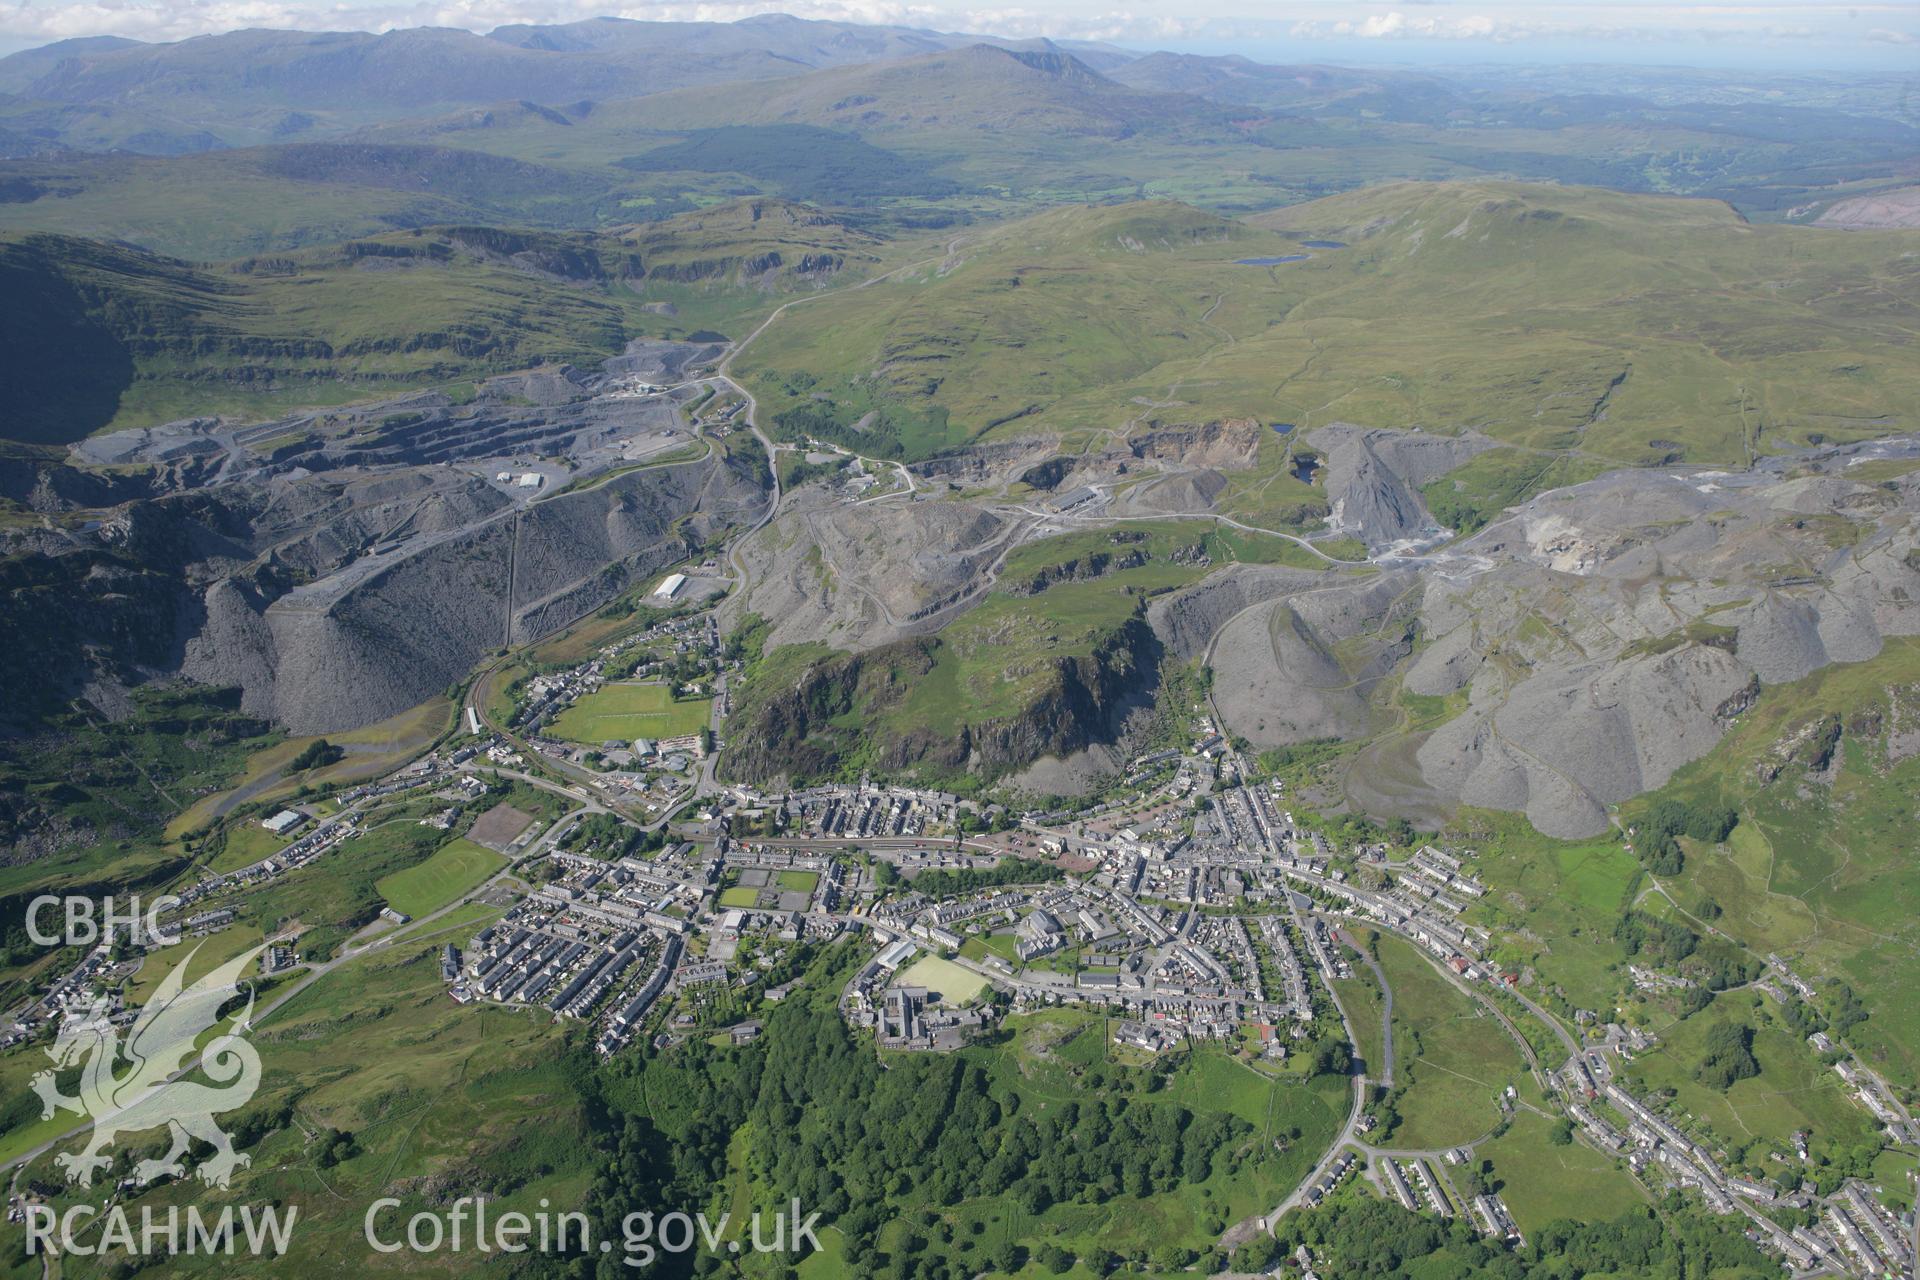 RCAHMW colour oblique photograph of Blaenau Ffestiniog, view from south. Taken by Toby Driver on 20/07/2011.